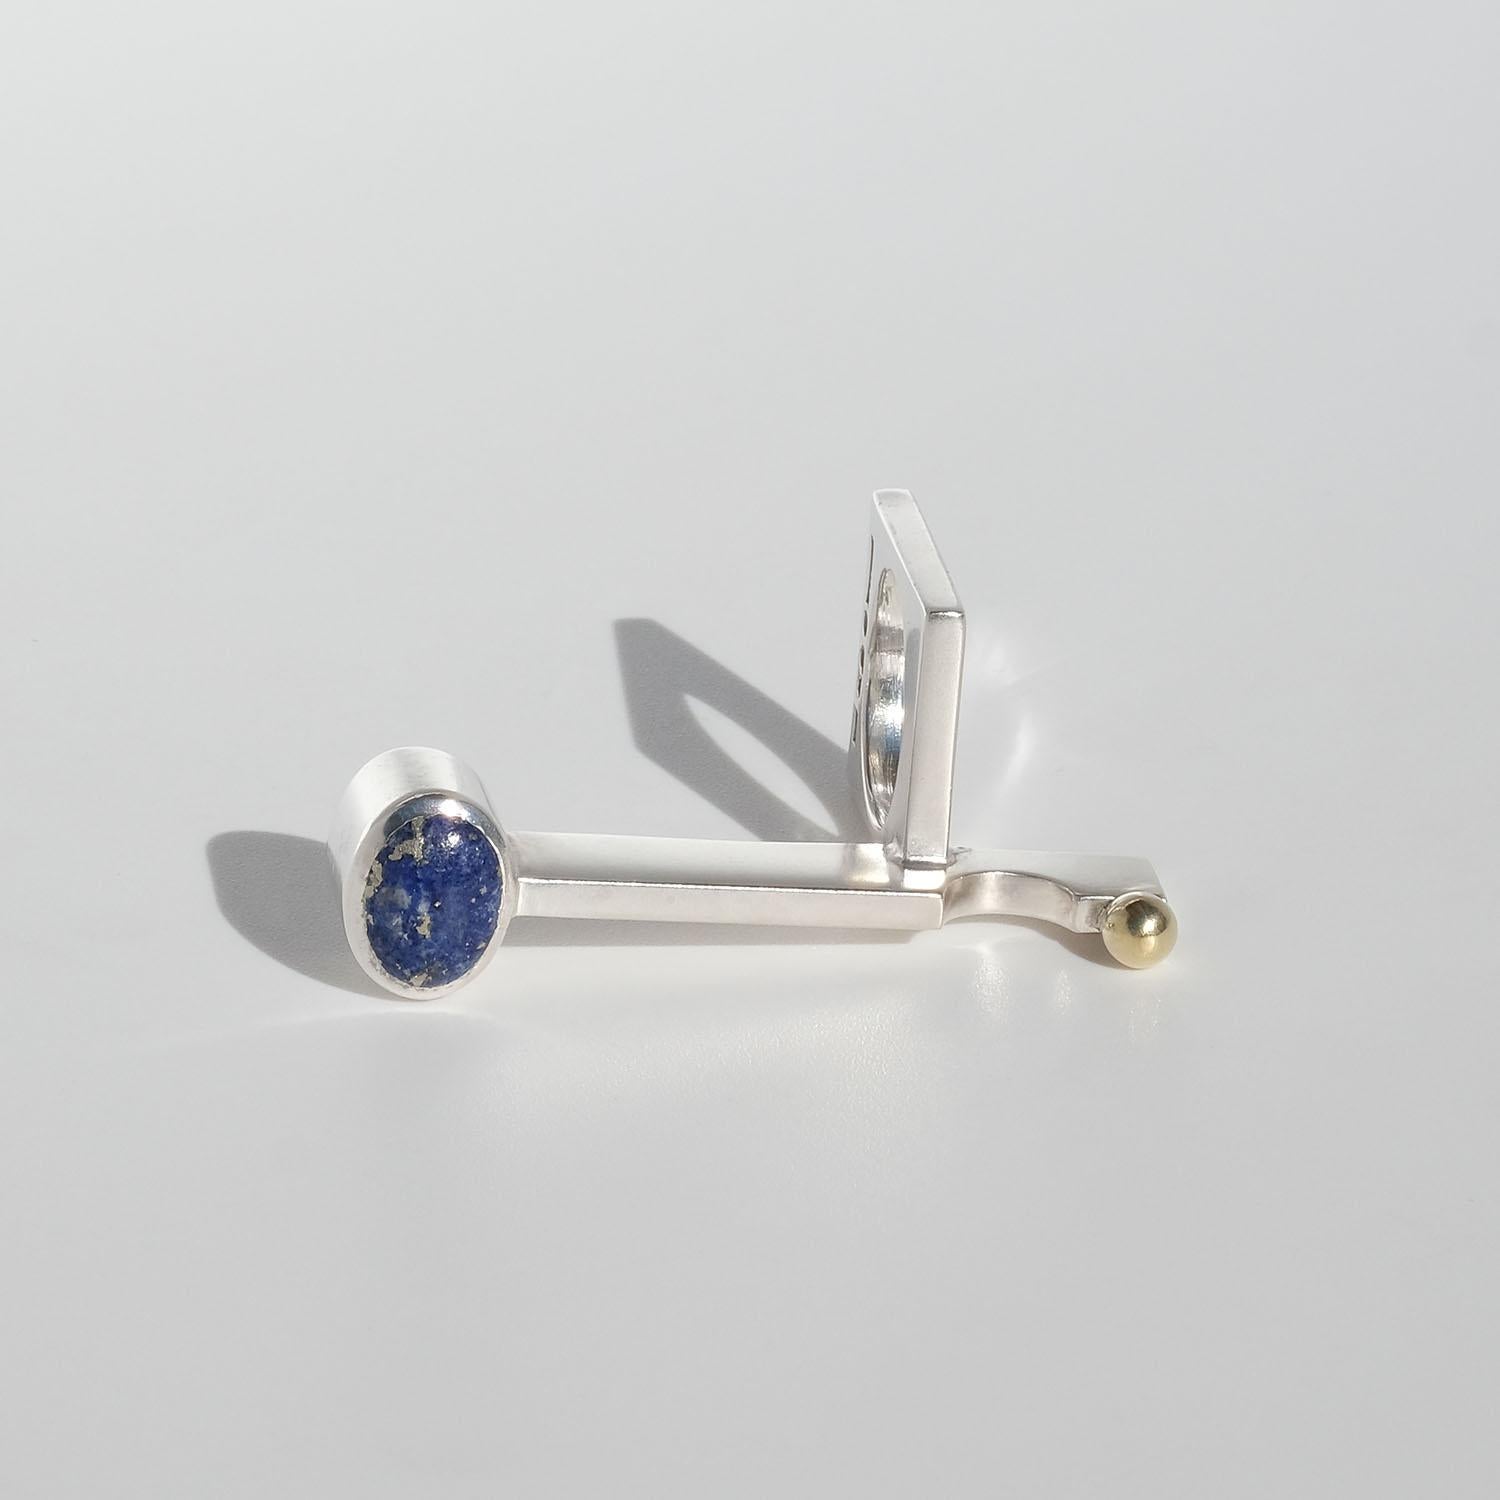 Vintage Silver and Lapis Lazuli Ring by Bengt Bellander Made Year 1973 For Sale 2